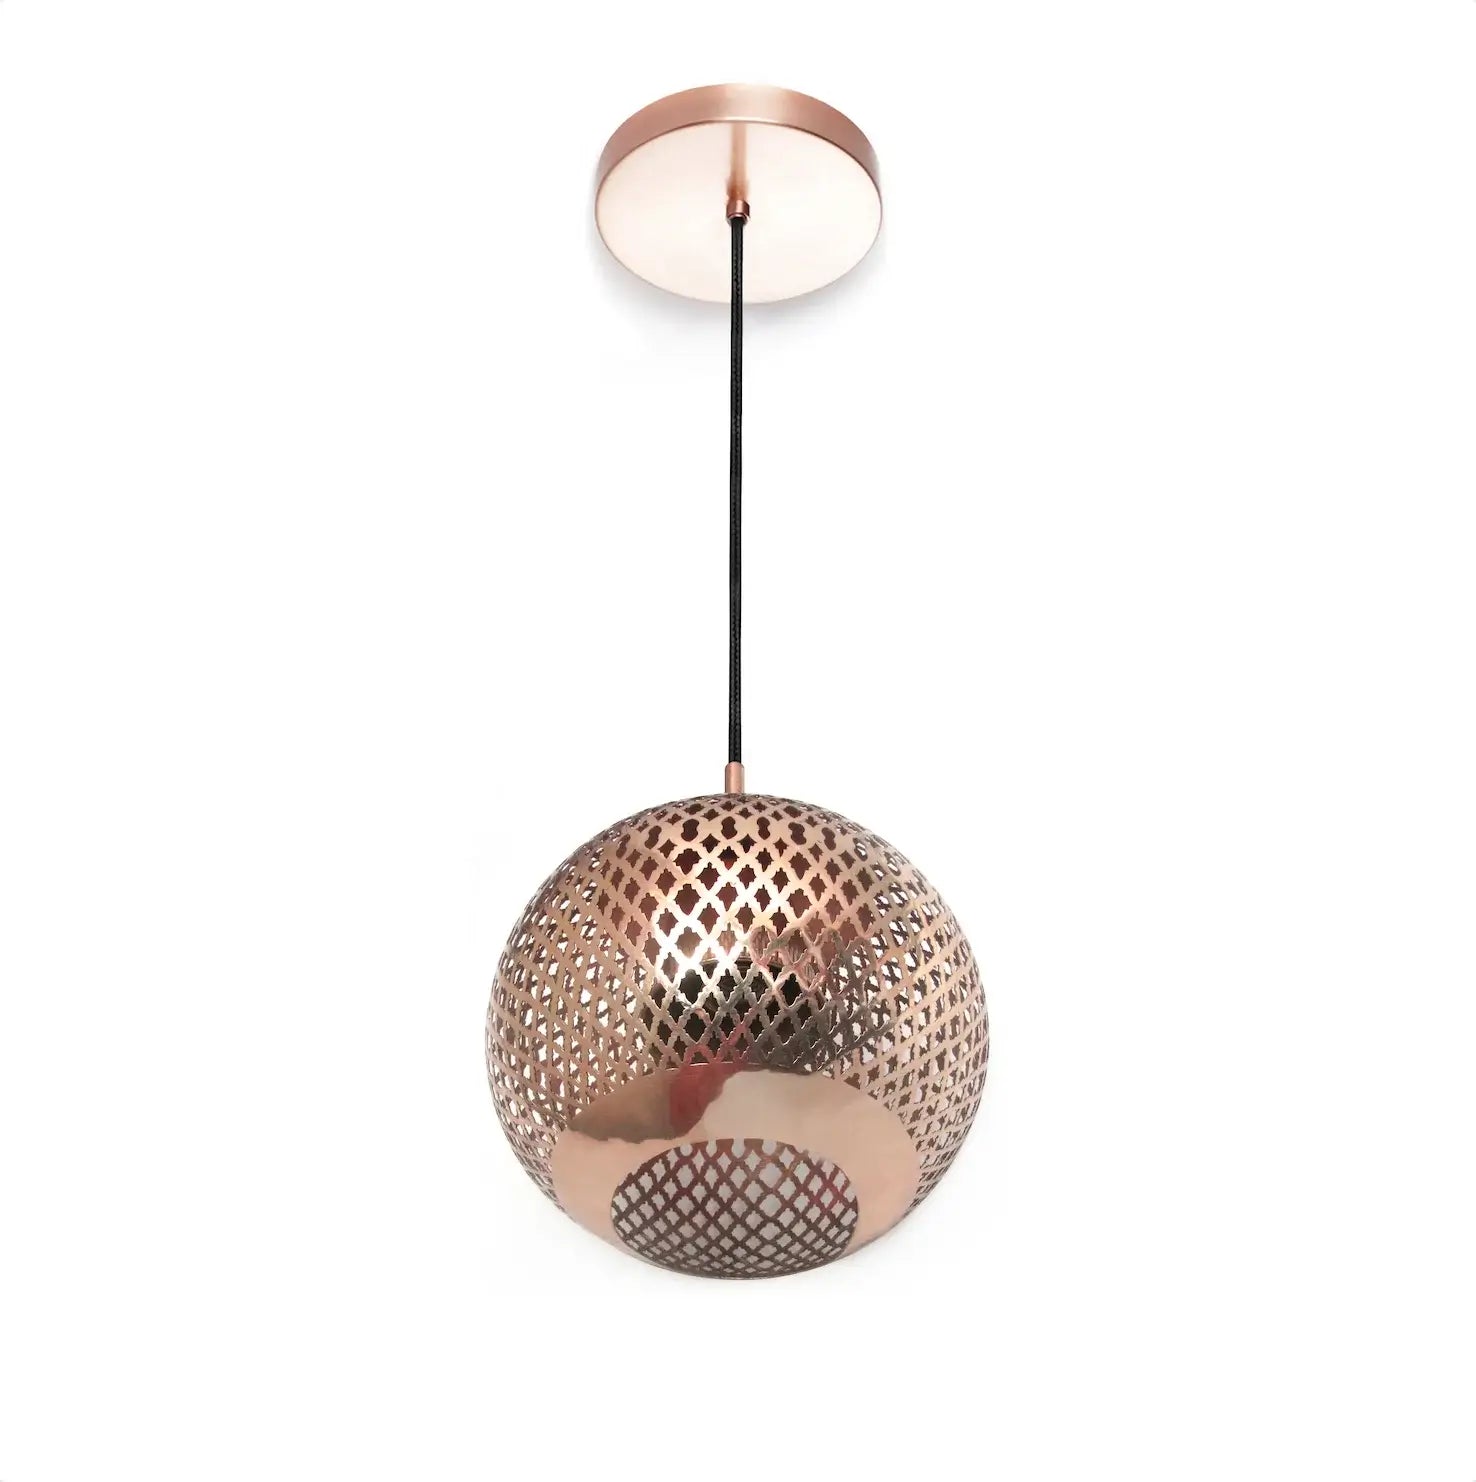 Dounia home Pendant light in Polished copper   made of Metal, Model: Ziya